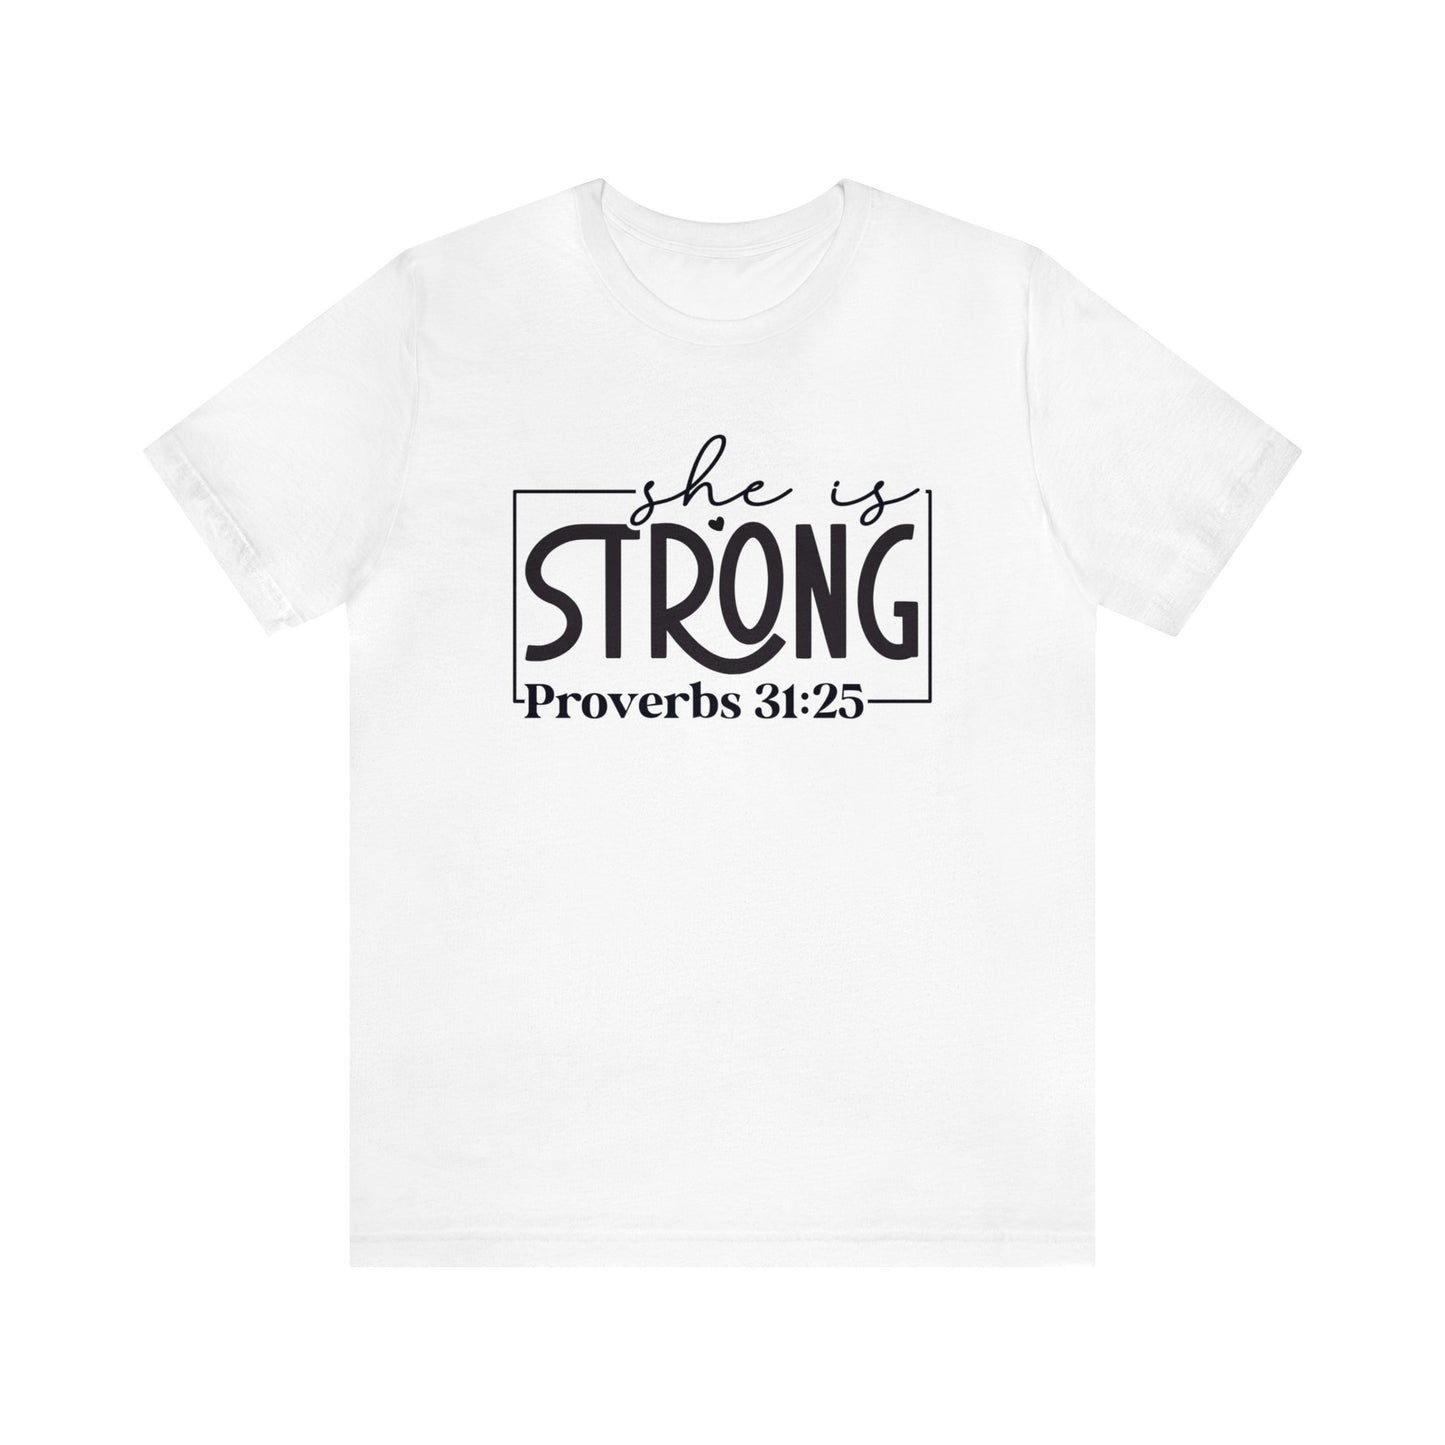 She is Strong Women's Short Sleeve Tee